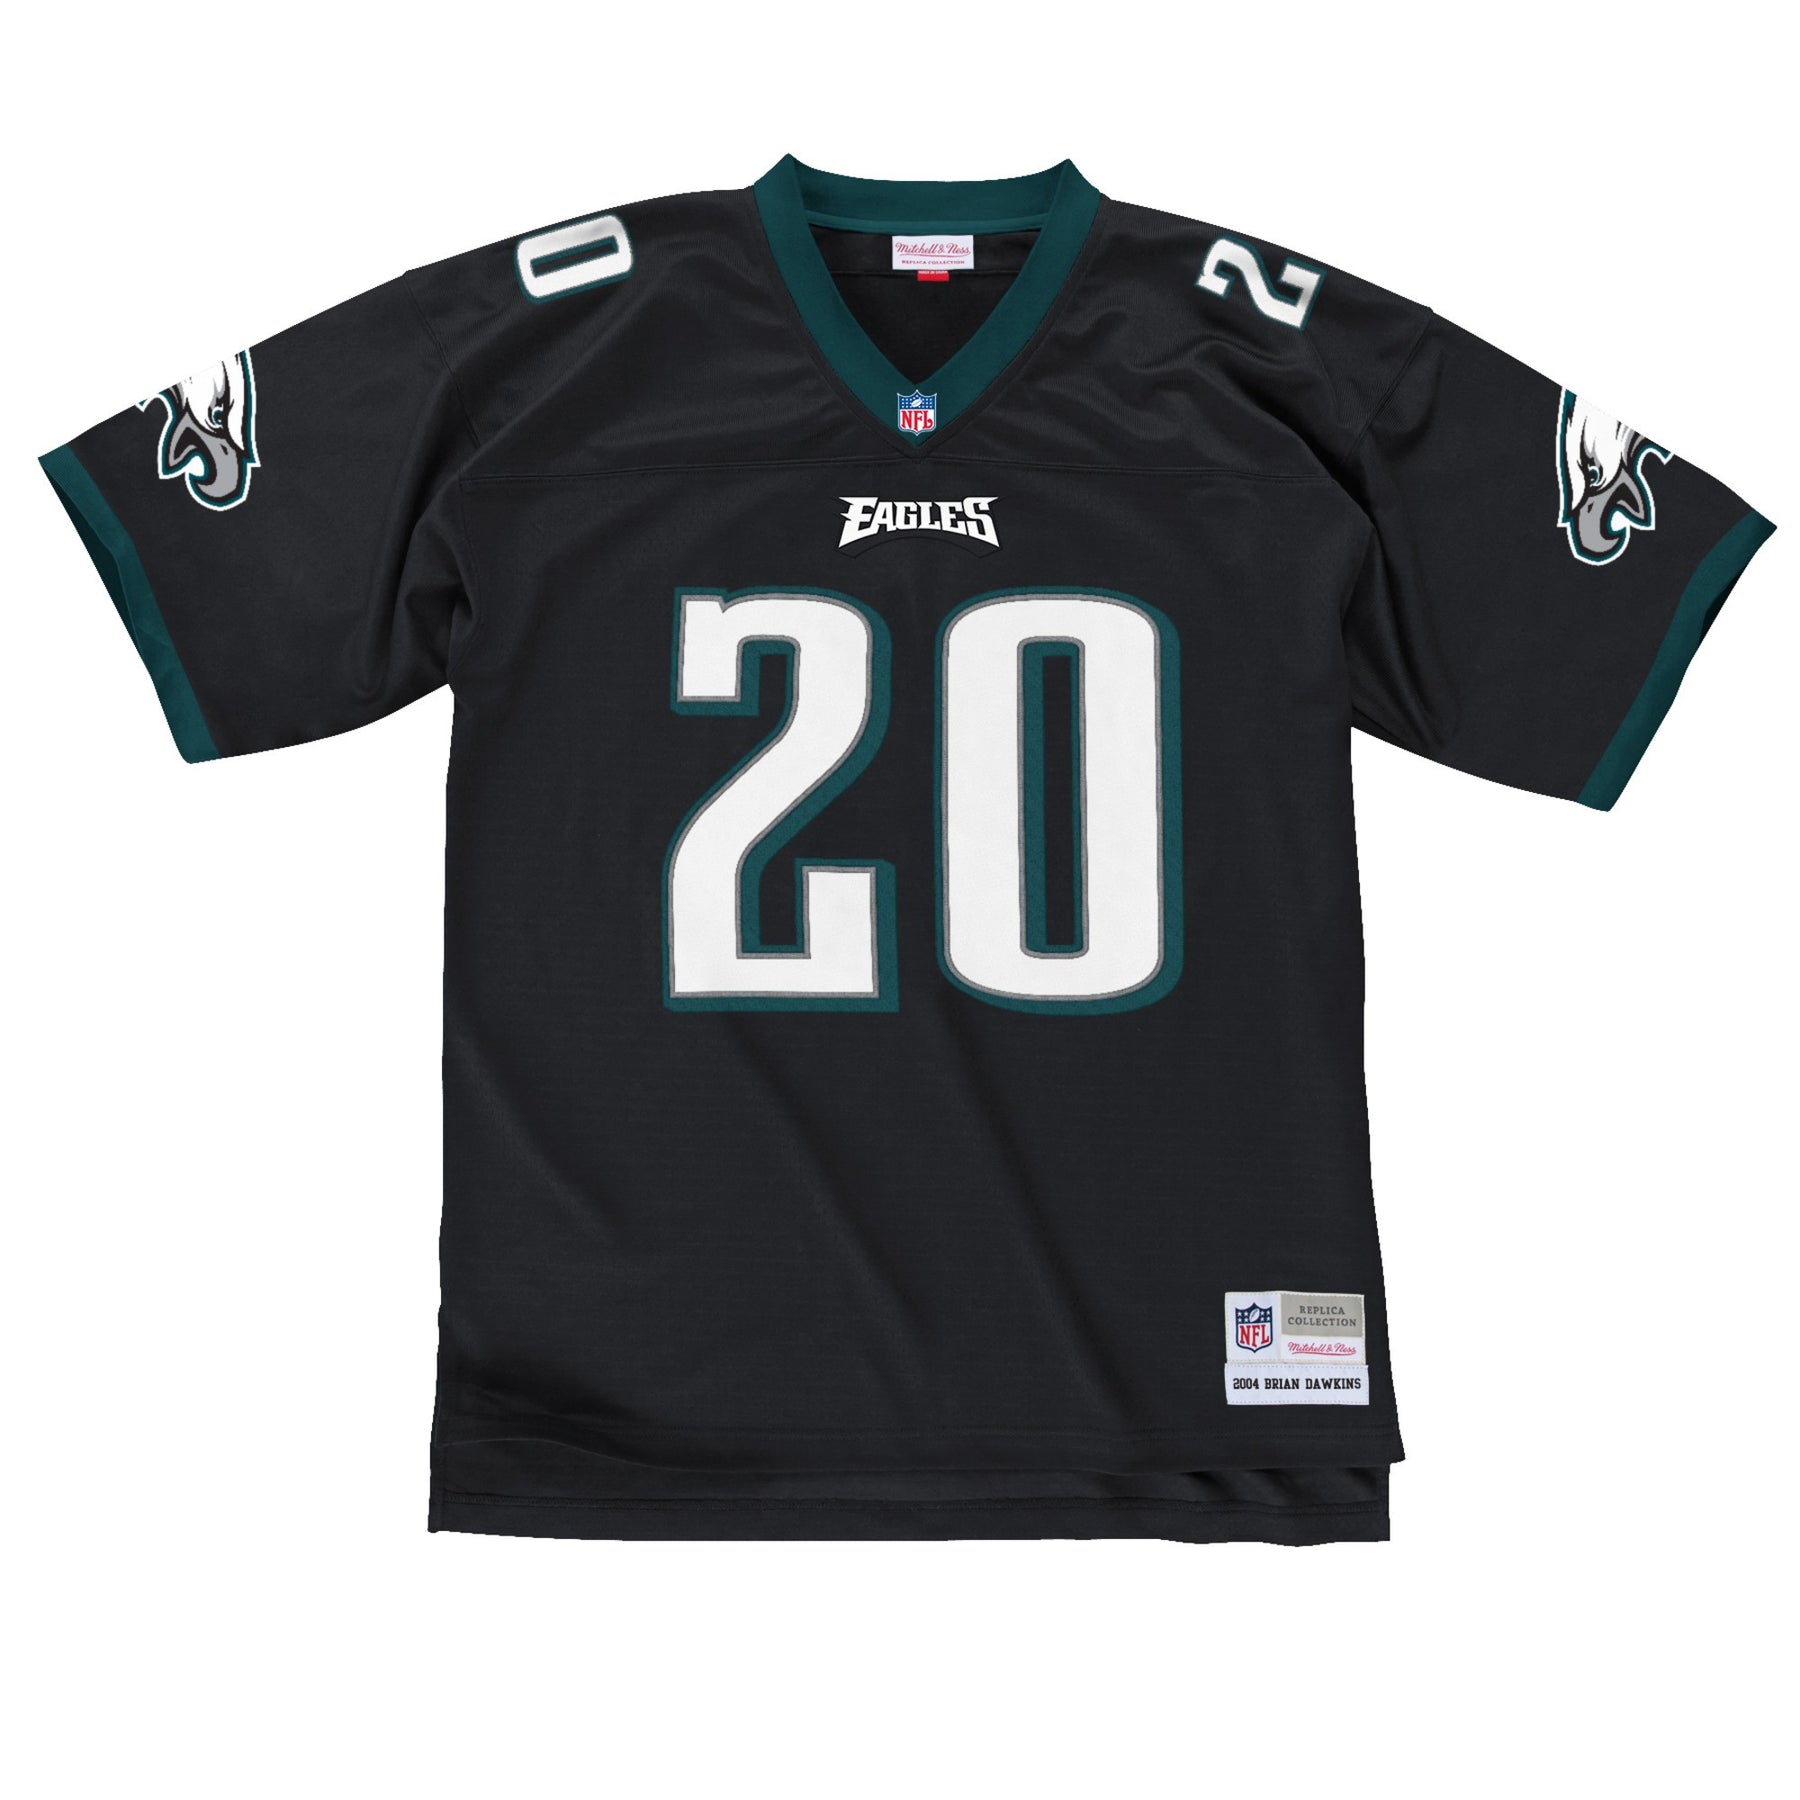 the eagles jersey